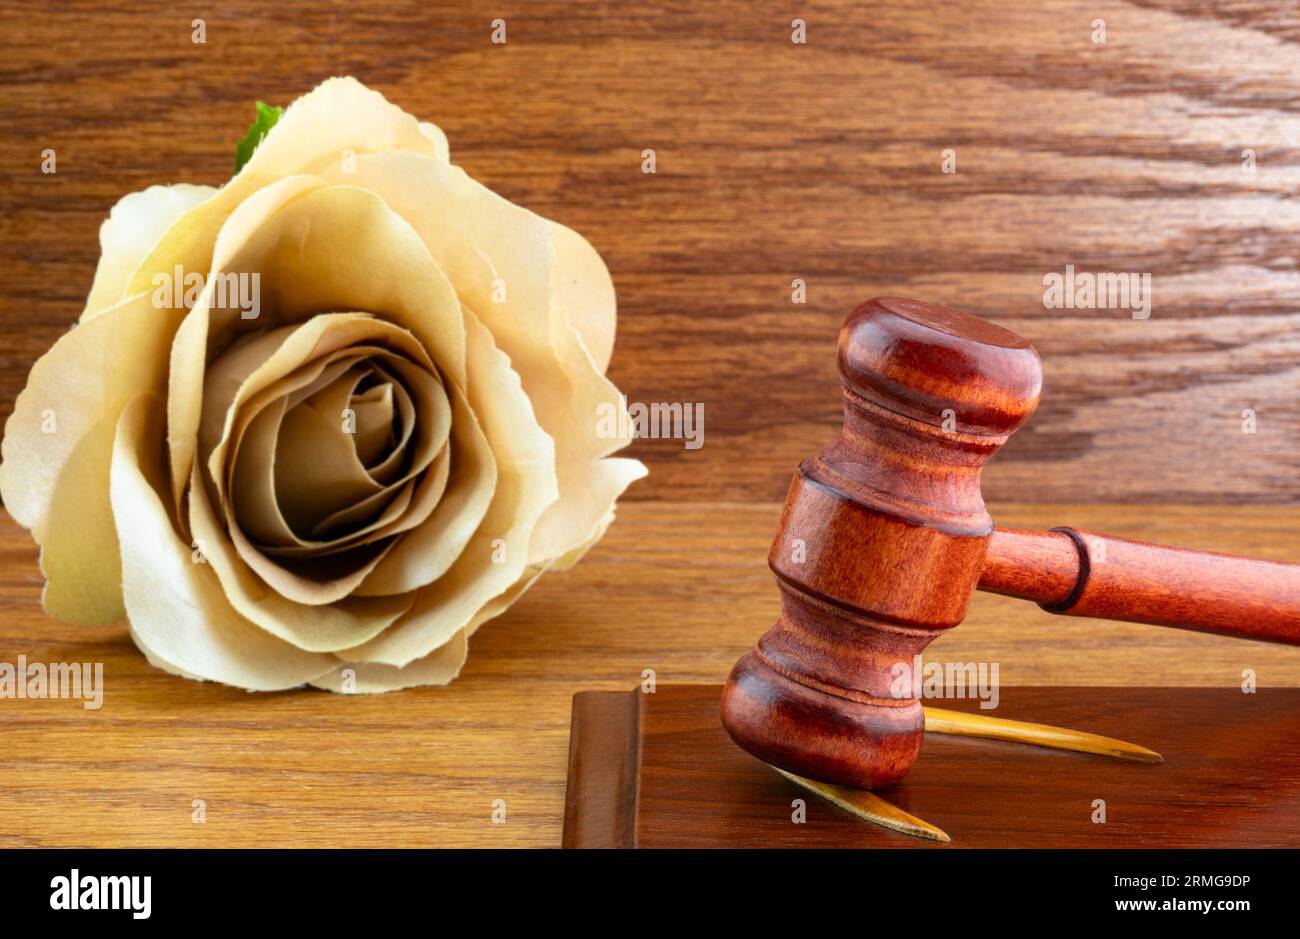 Beige rose on brown wood grain background placed with polished wooden gavel is feminine reflection of justice and judicial authority Stock Photo